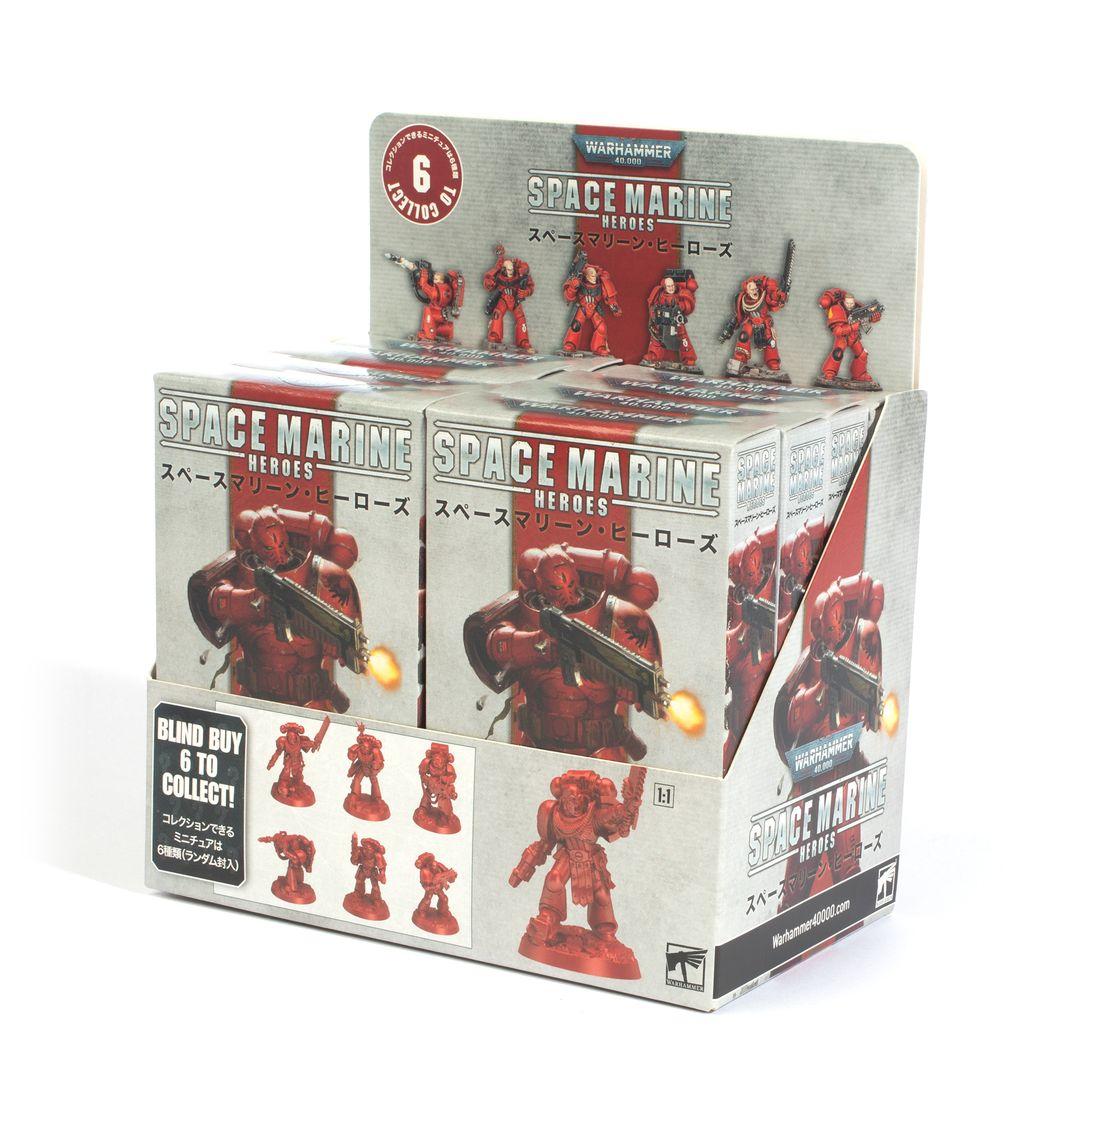 Space Marine Heroes 2022 Blood Angels Collection one - Display